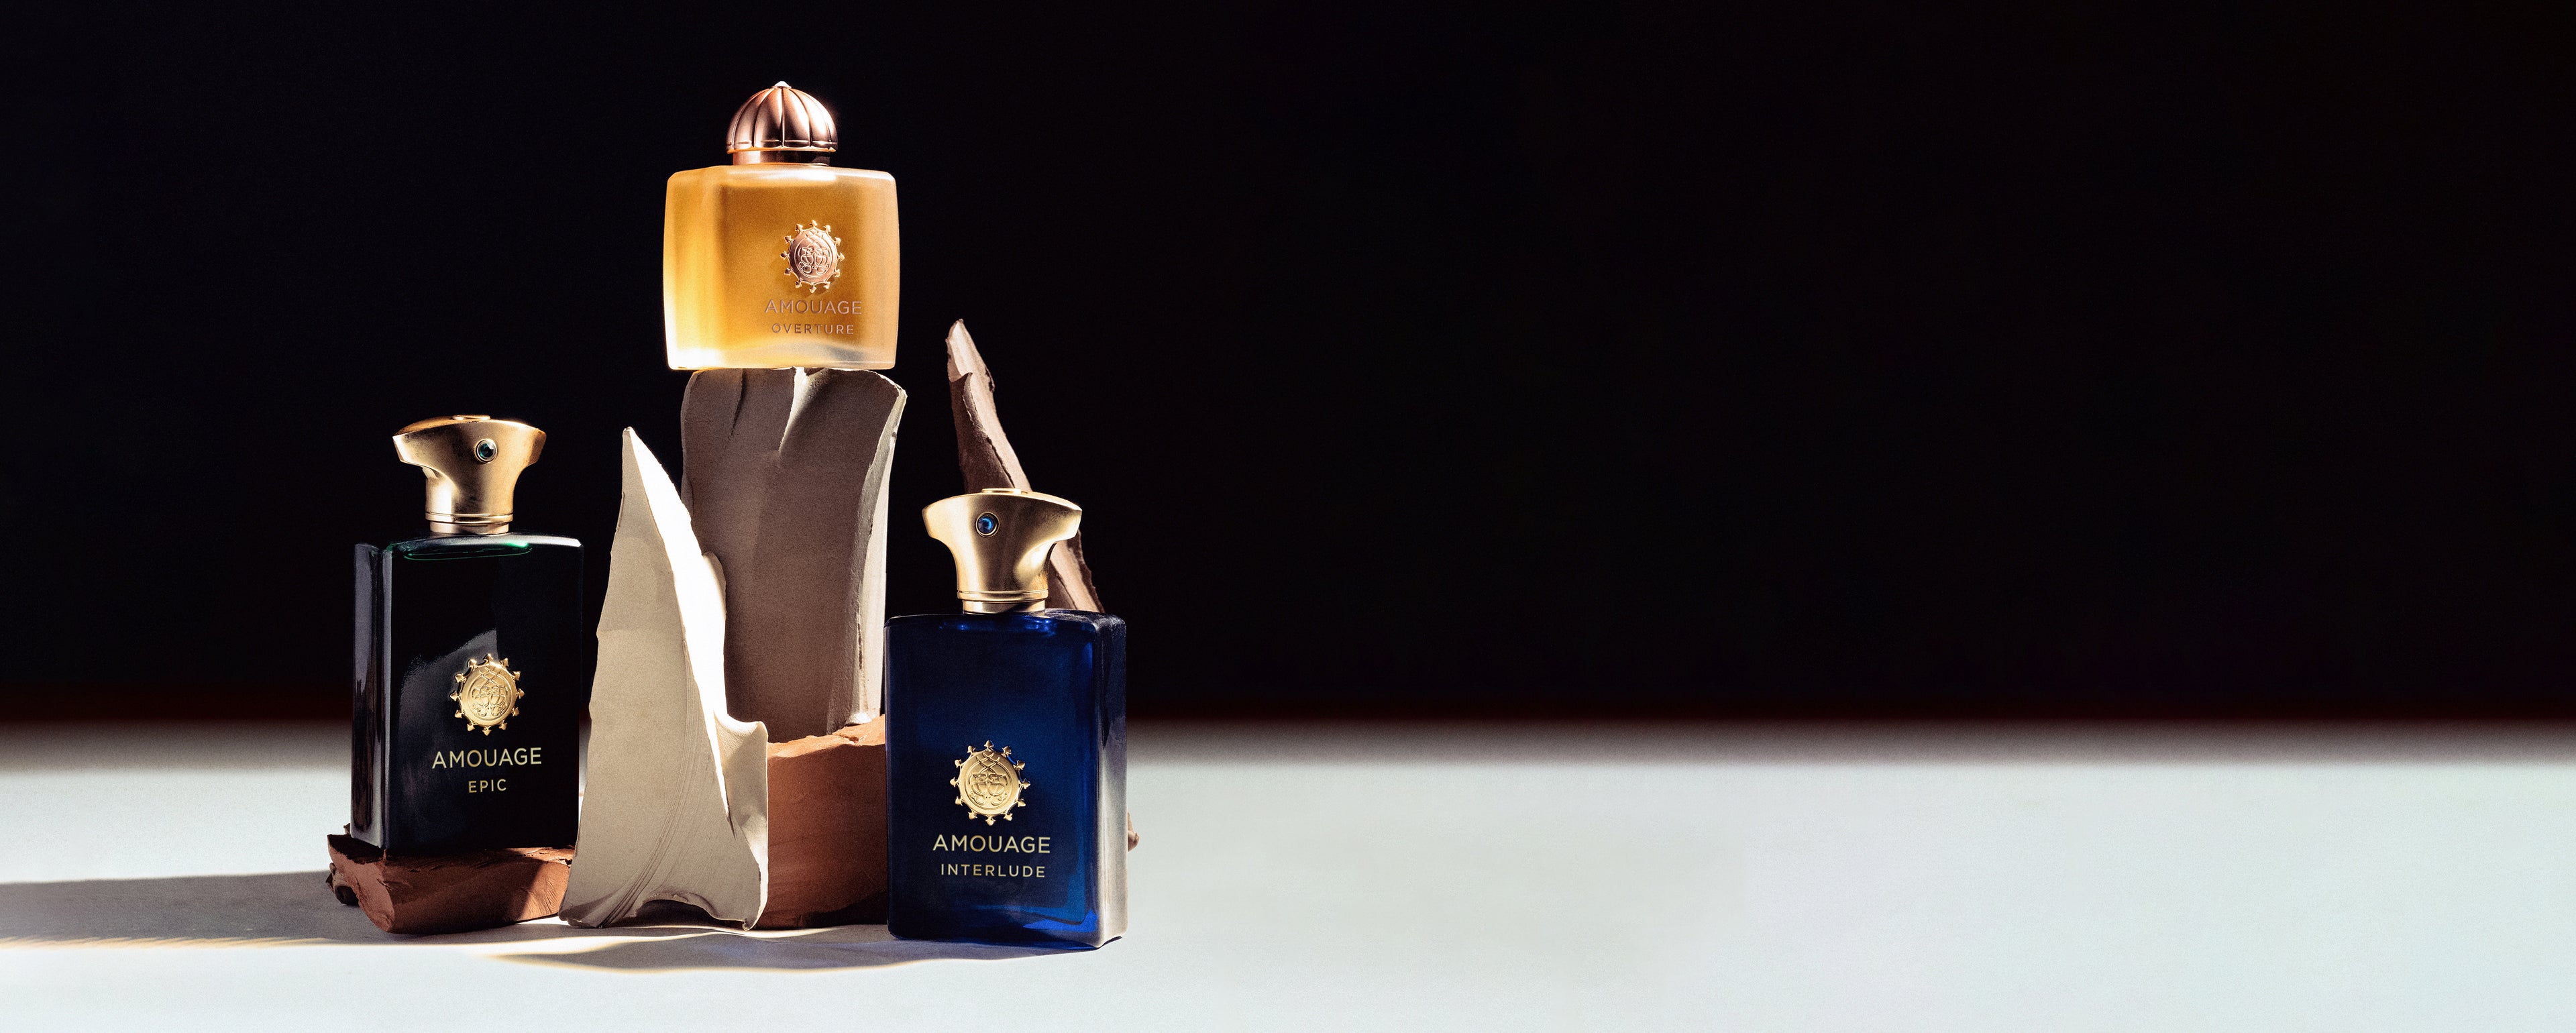 The Main Collection – The House of Amouage